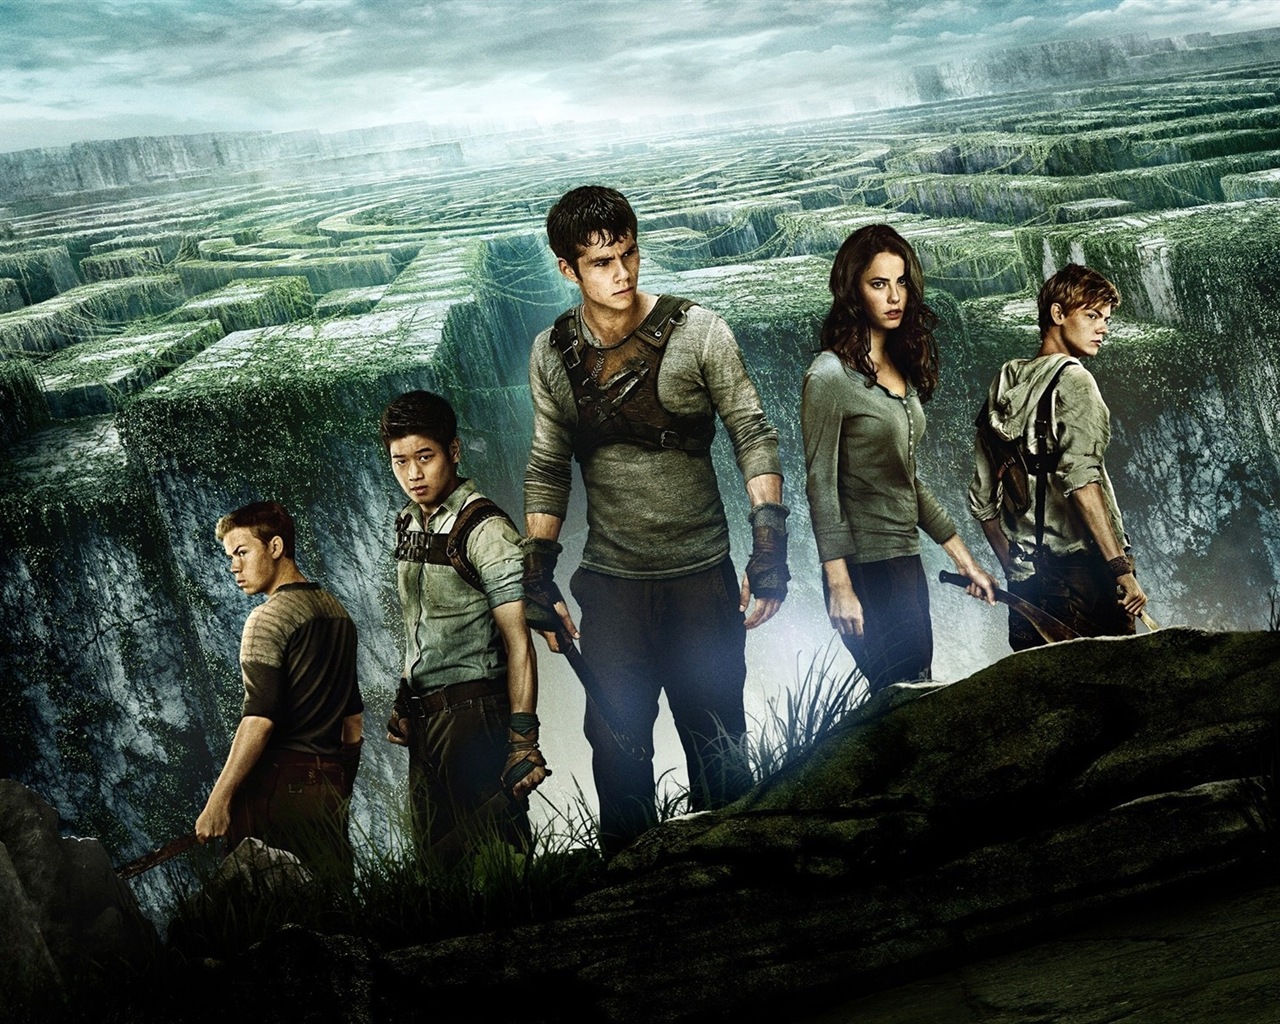 The Maze Runner HD movie wallpapers #1 - 1280x1024